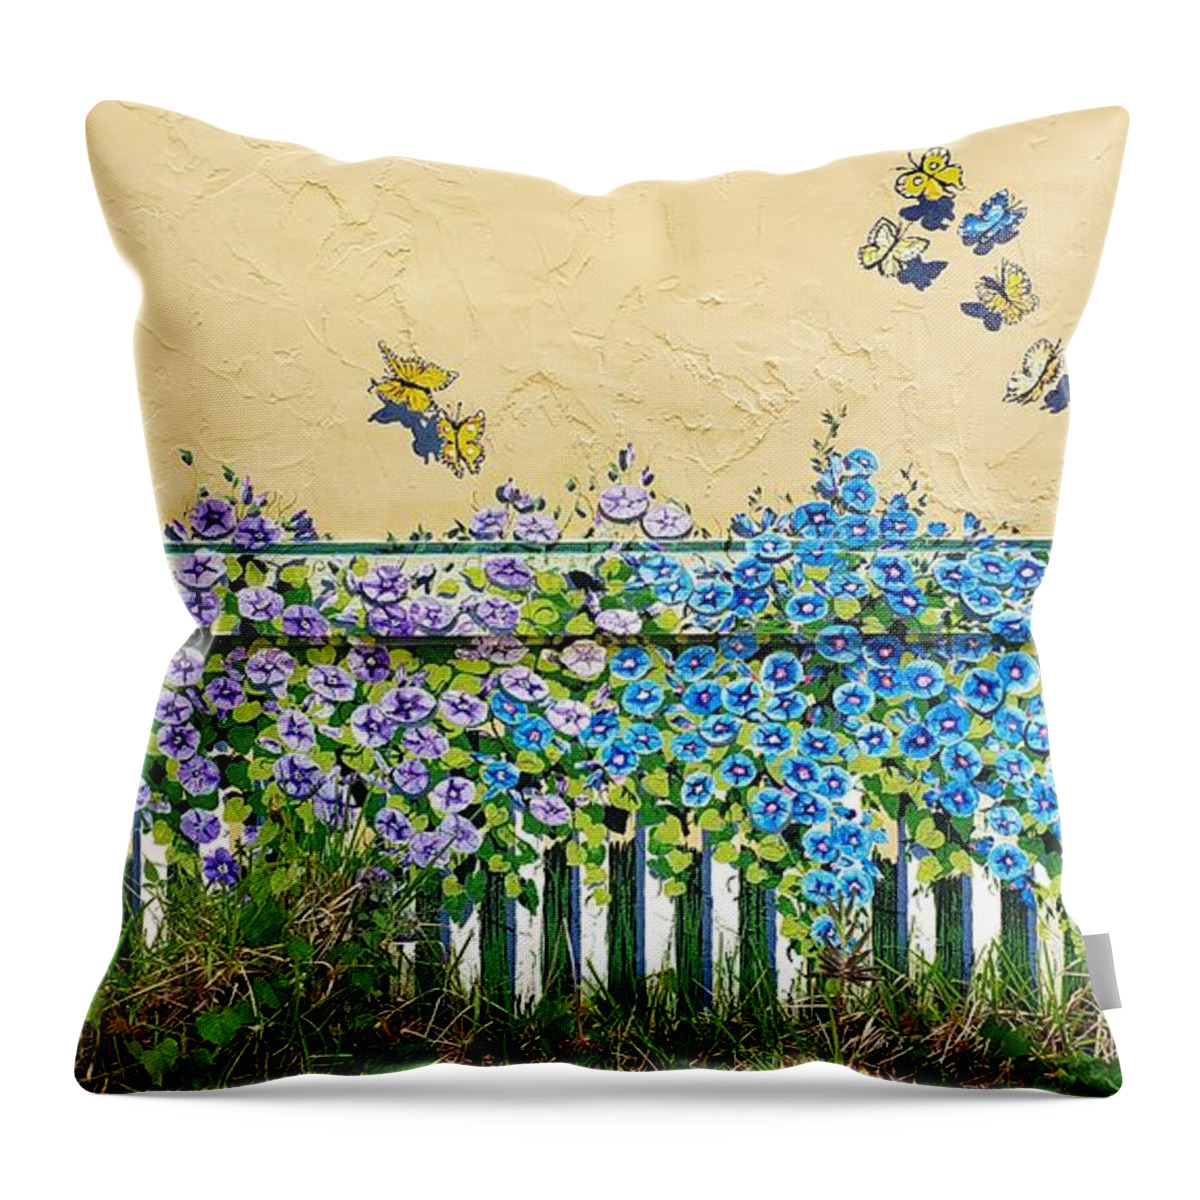 Mural Throw Pillow featuring the painting Morning Glories and Butterflies by Merana Cadorette